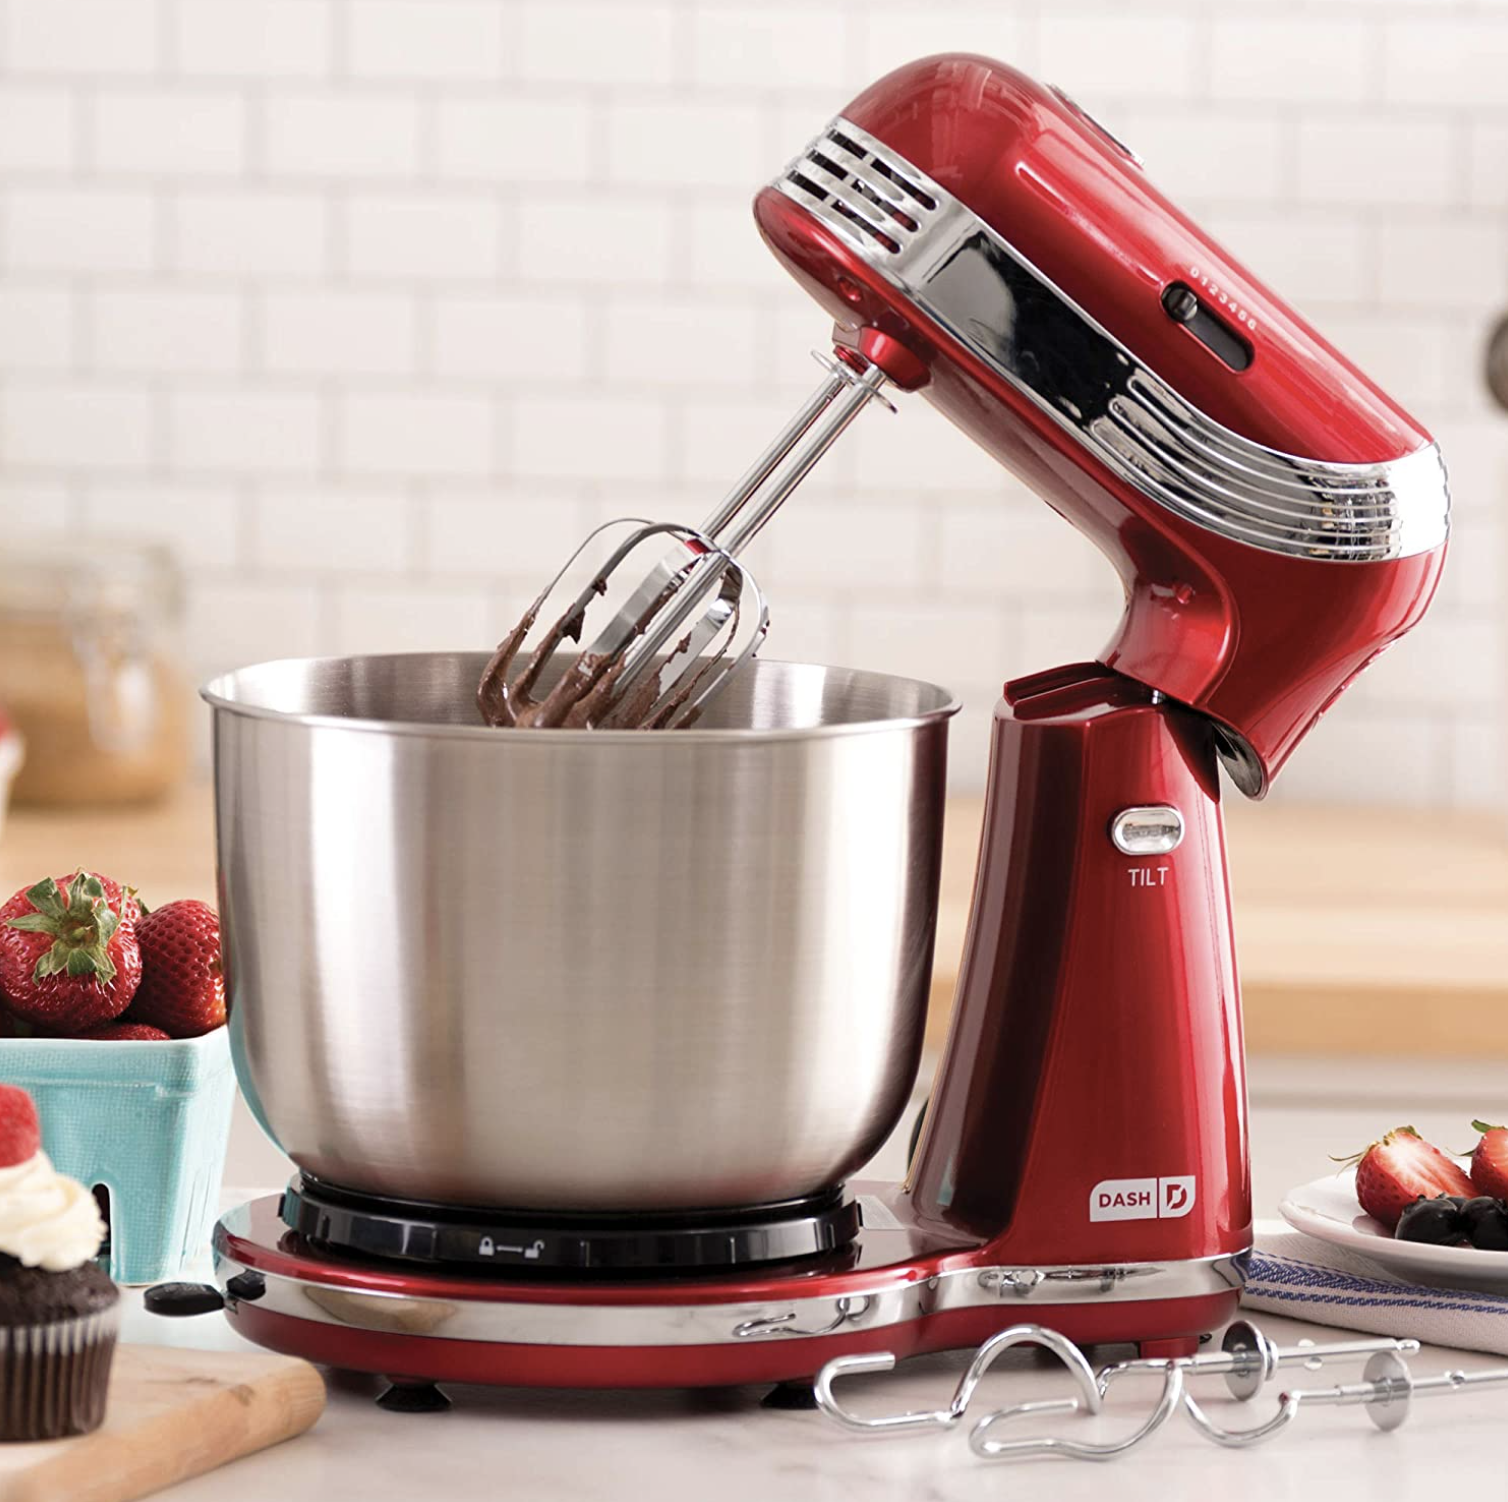 the stand mixer with cake batter in it on a counter